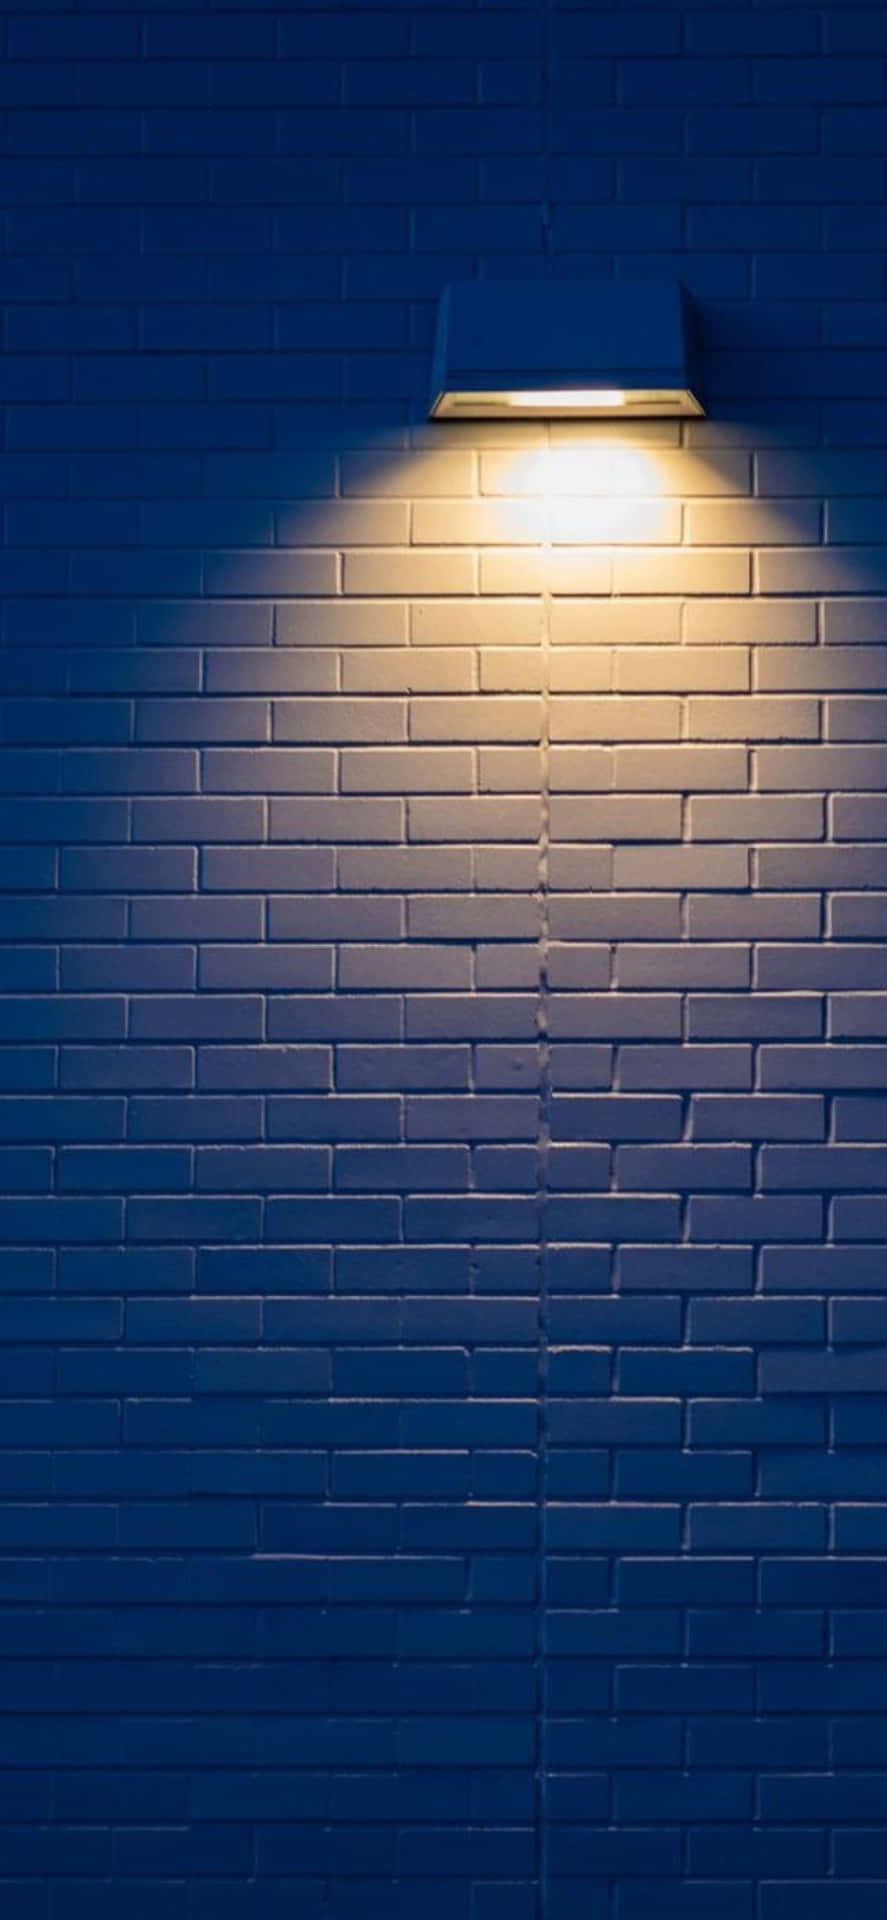 Lamp On A Brick Wall Iphone X Minimal Background